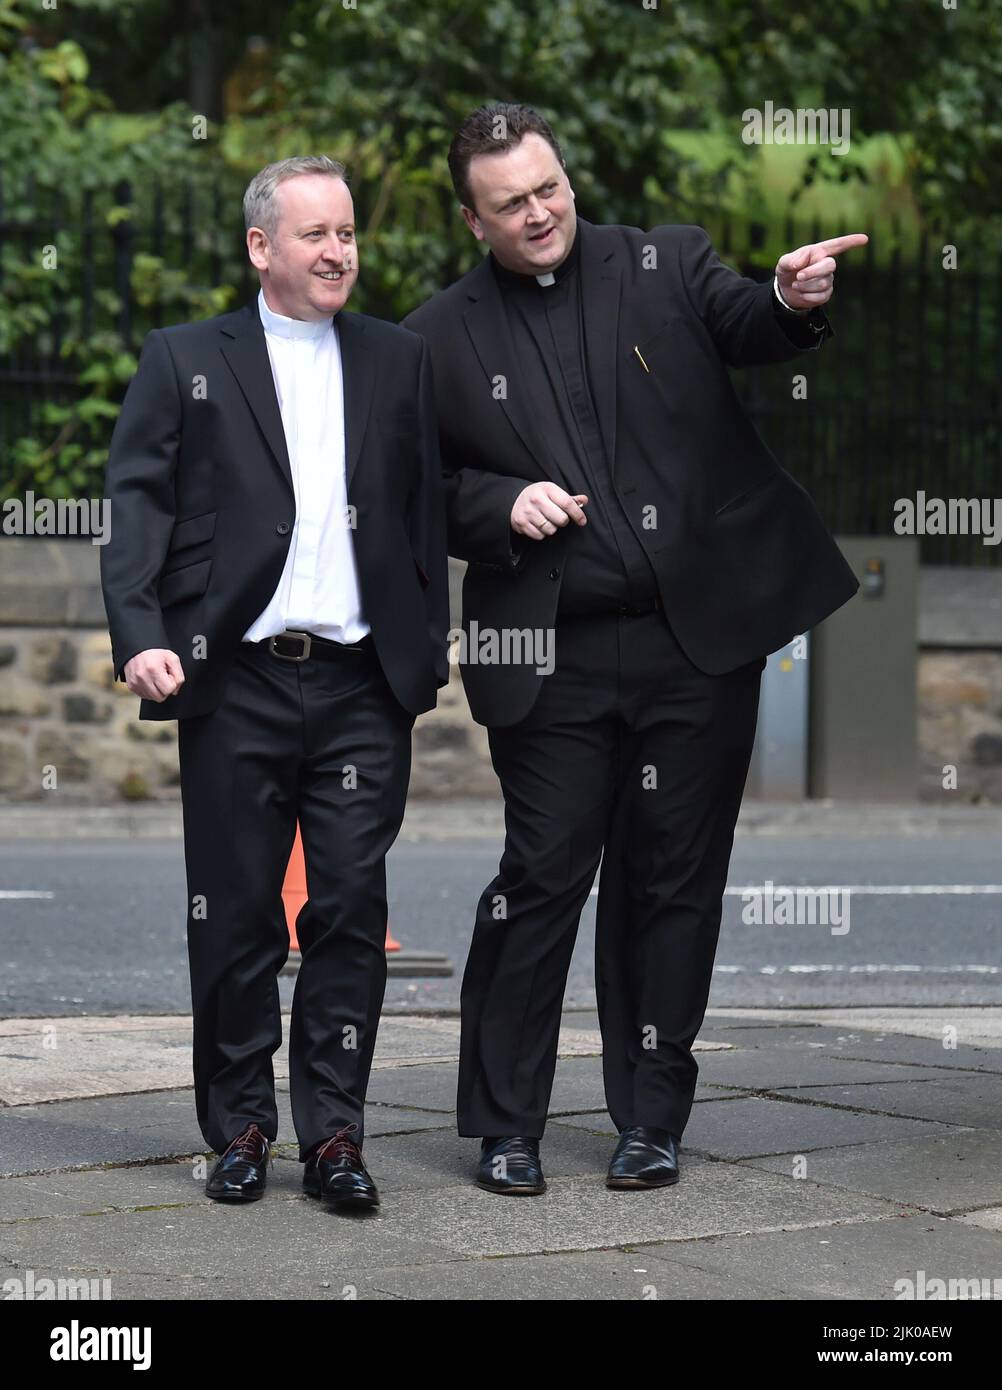 File photo dated 1/8/2015 of Father Dermott Donnelly (left) outside St Michael's Church, Elswick, Newcastle, ahead of the wedding of his brother Declan Donnelly and Ali Astall. A Requiem Mass will be held for the brother of TV star Dec. The popular priest, who had recently celebrated 30 years of service in the Catholic church, died earlier this month in hospital after falling seriously ill. The Requiem Mass was being held at St Mary's Cathedral, Newcastle, on Friday lunchtime. Issue date: Friday July 29, 2022. Stock Photo